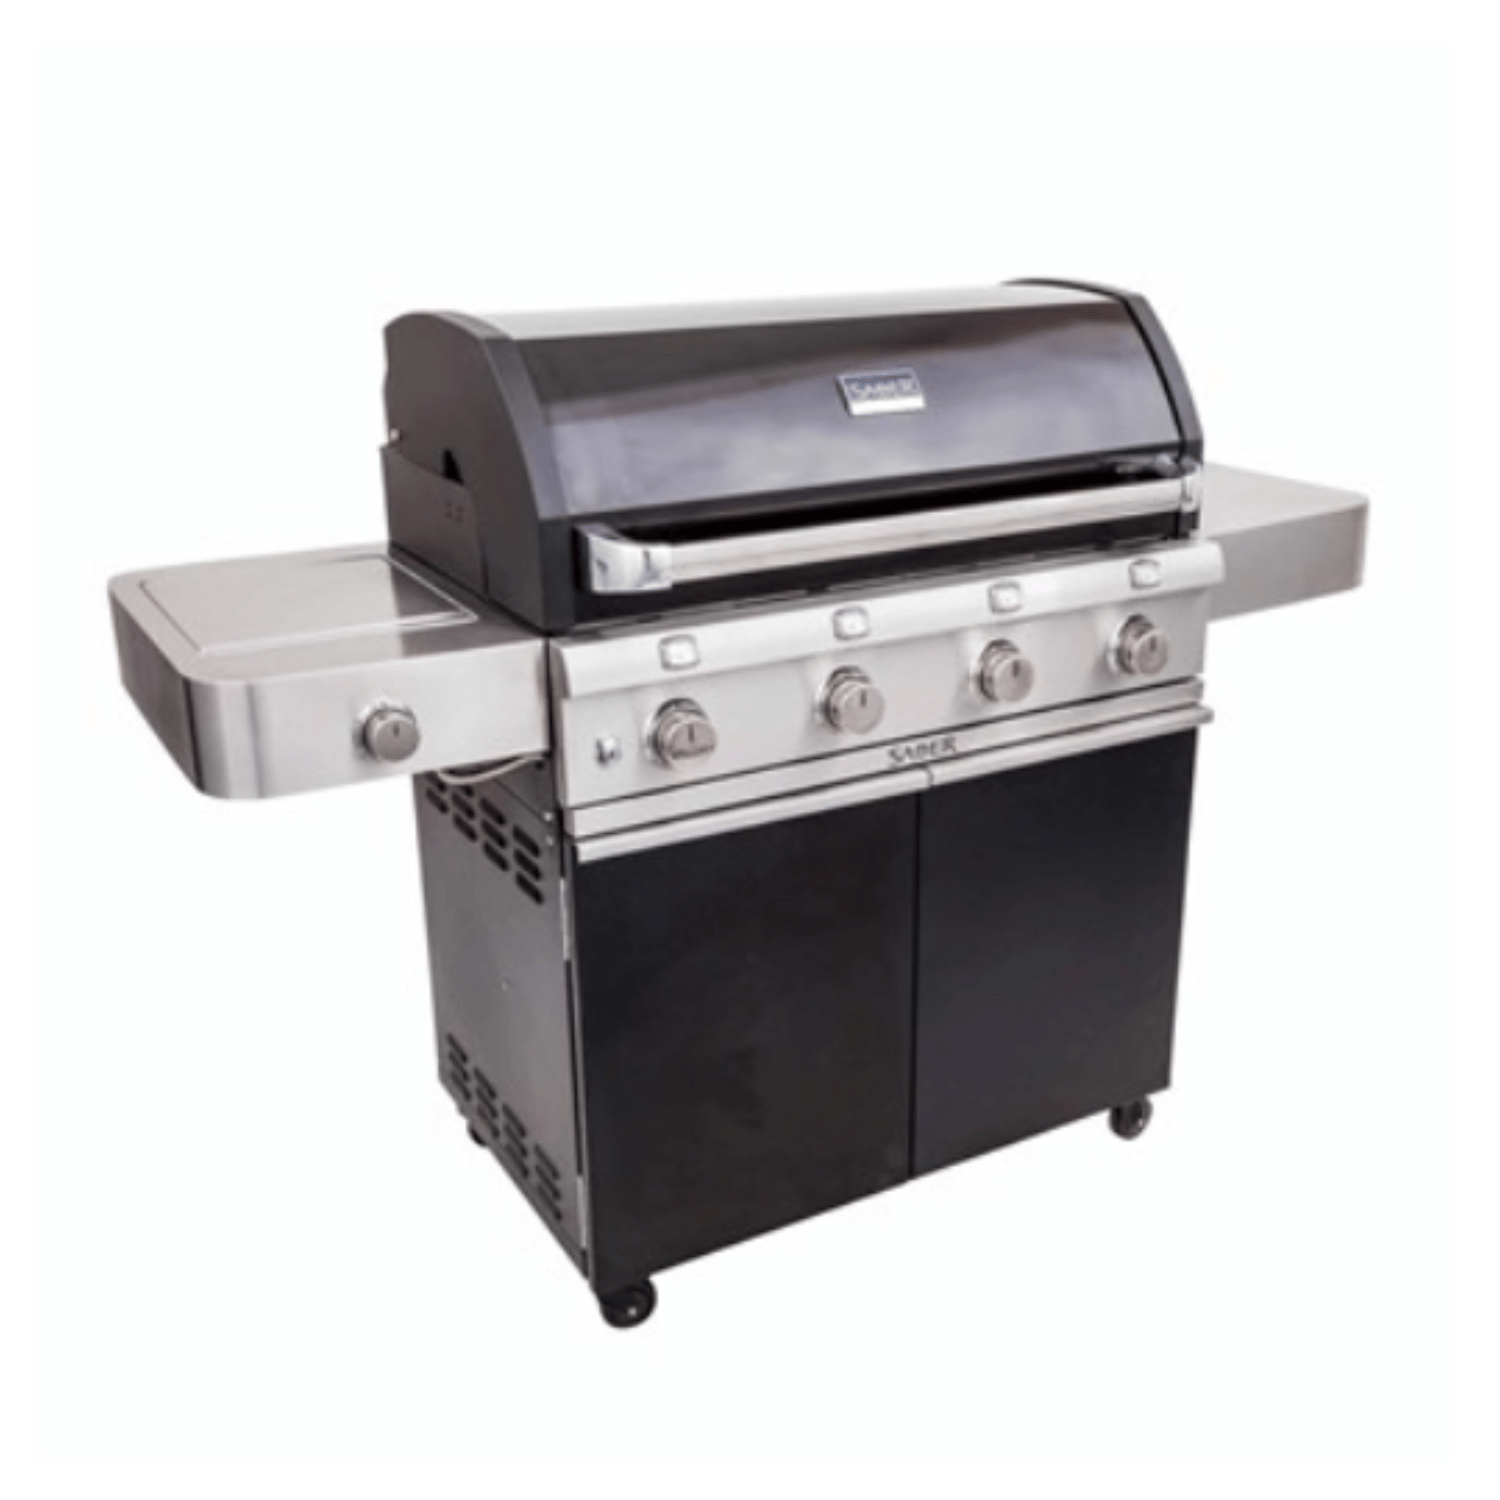 Barbecue Deluxe 670 – Saber